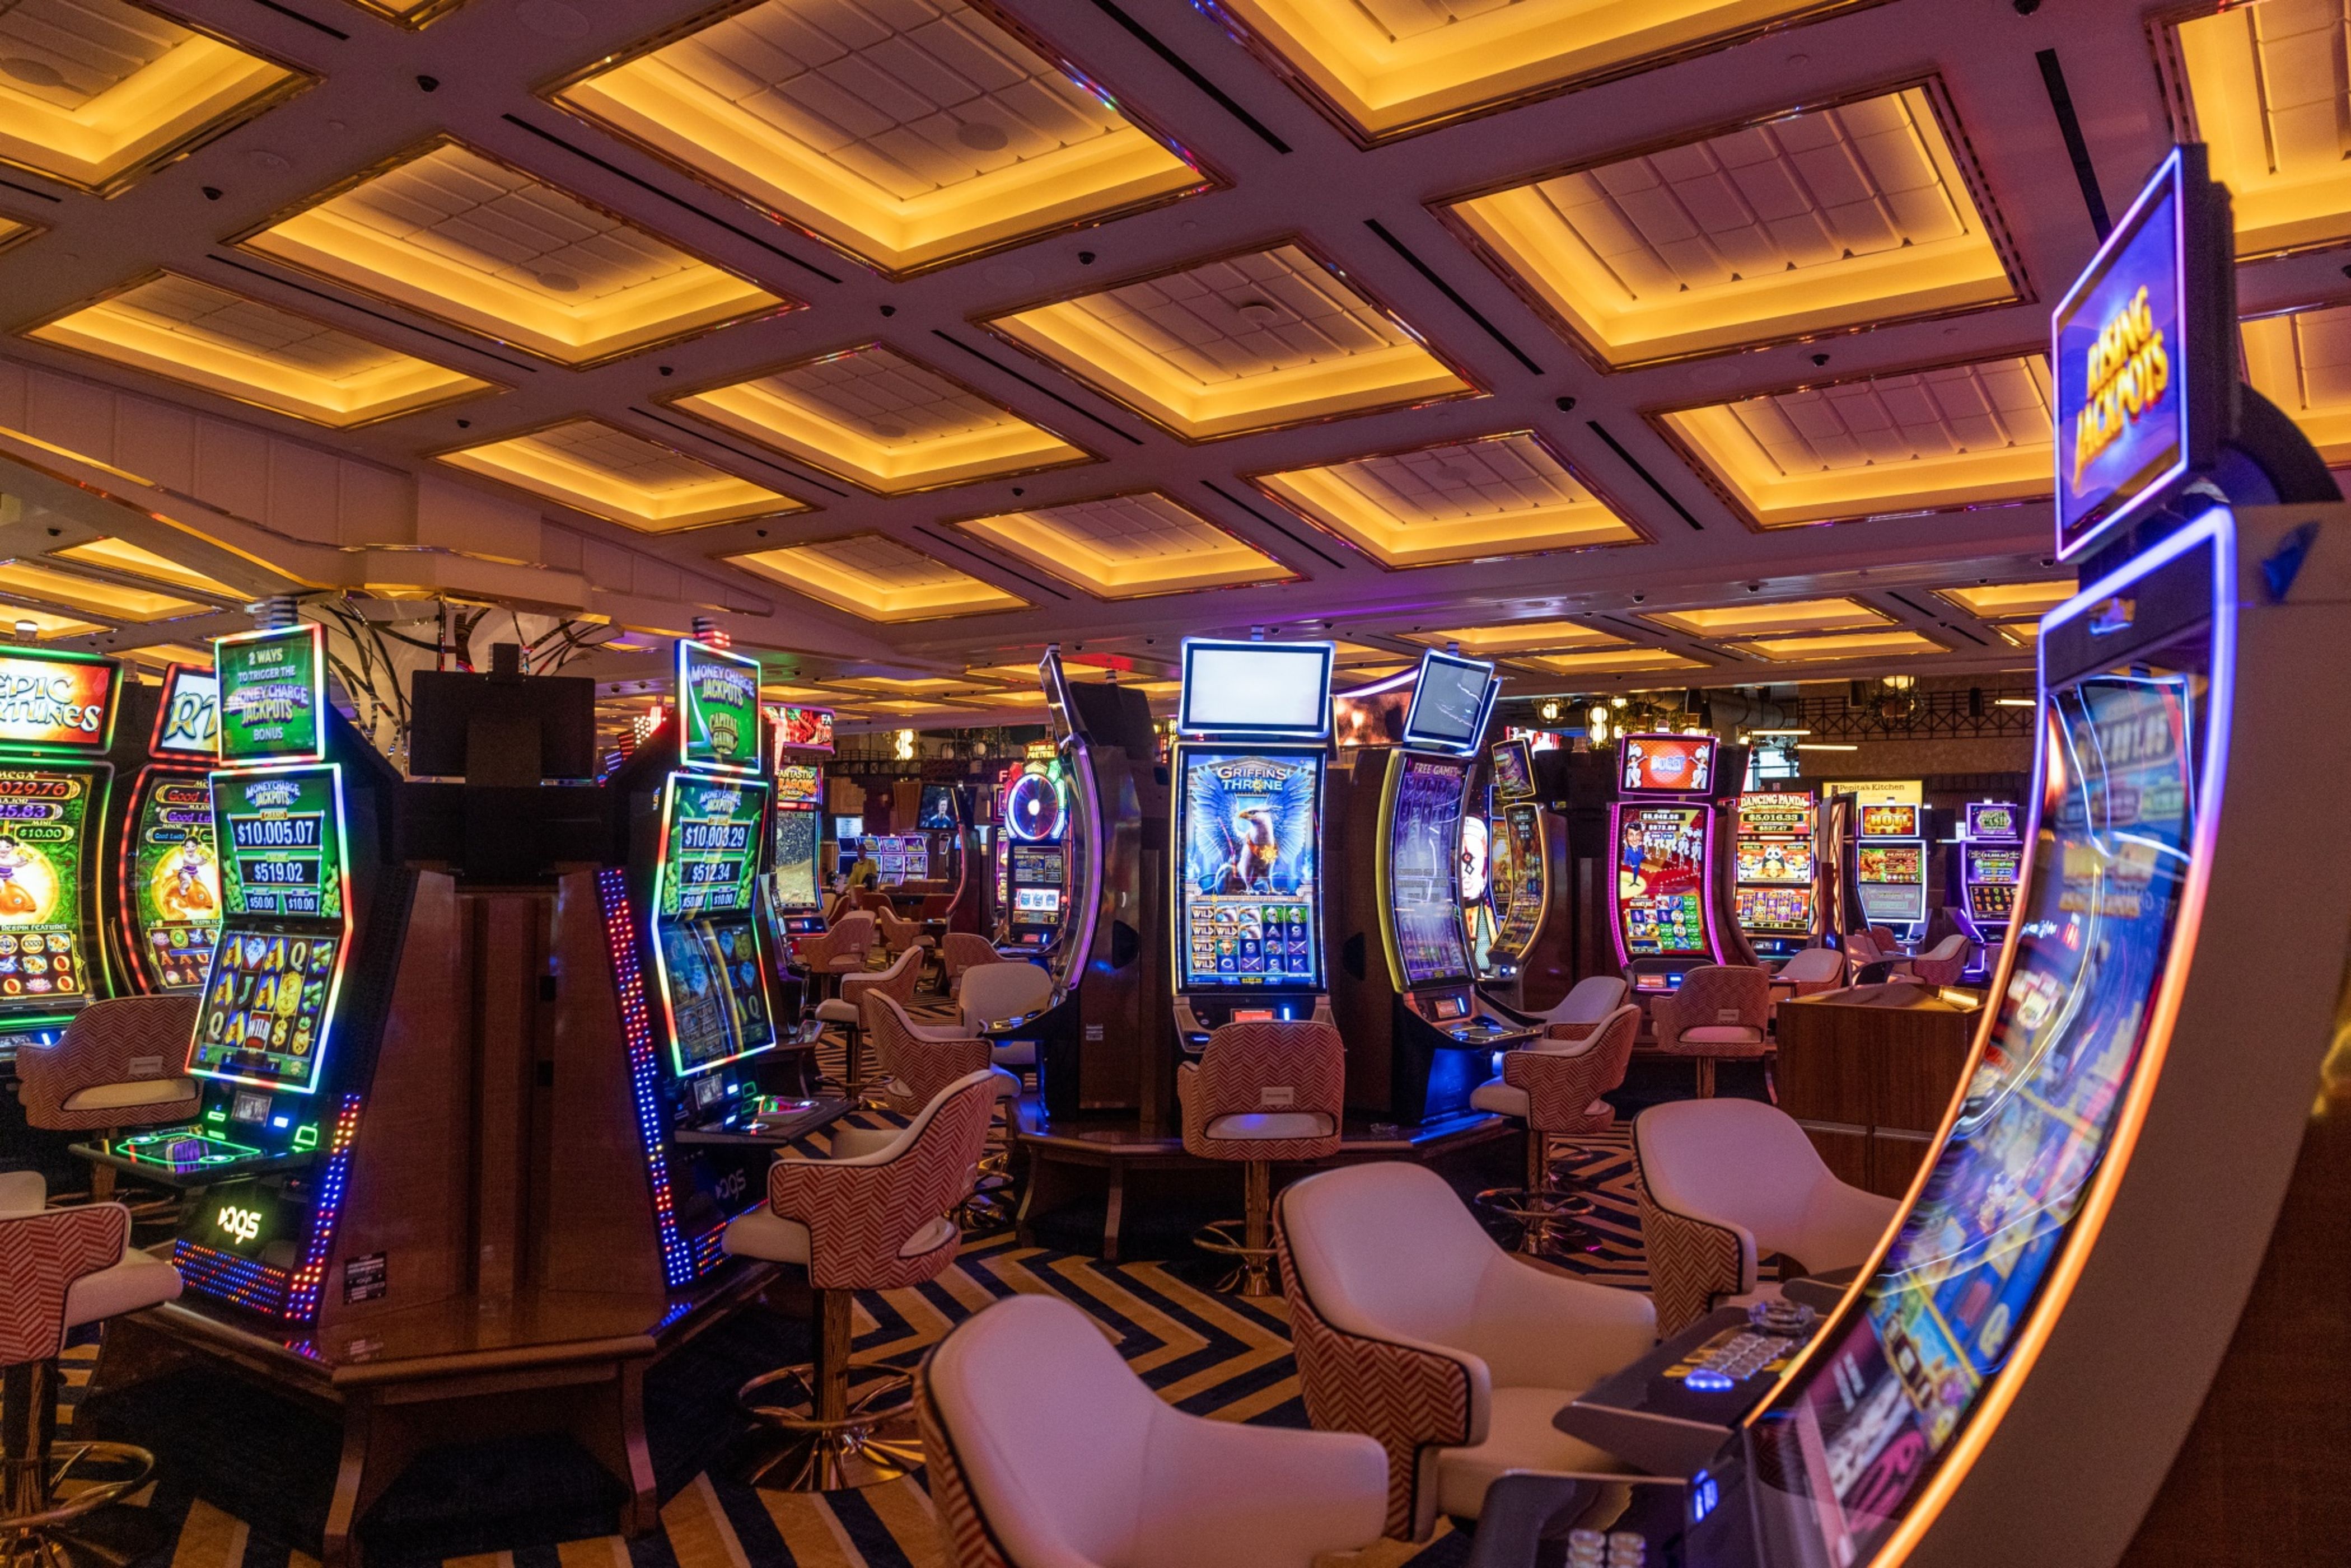 Opening the gambling halls will generate taxes, jobs, diversify recreational activities and prevent the proliferation of “illicit businesses”, but it will not solve the economic crisistext